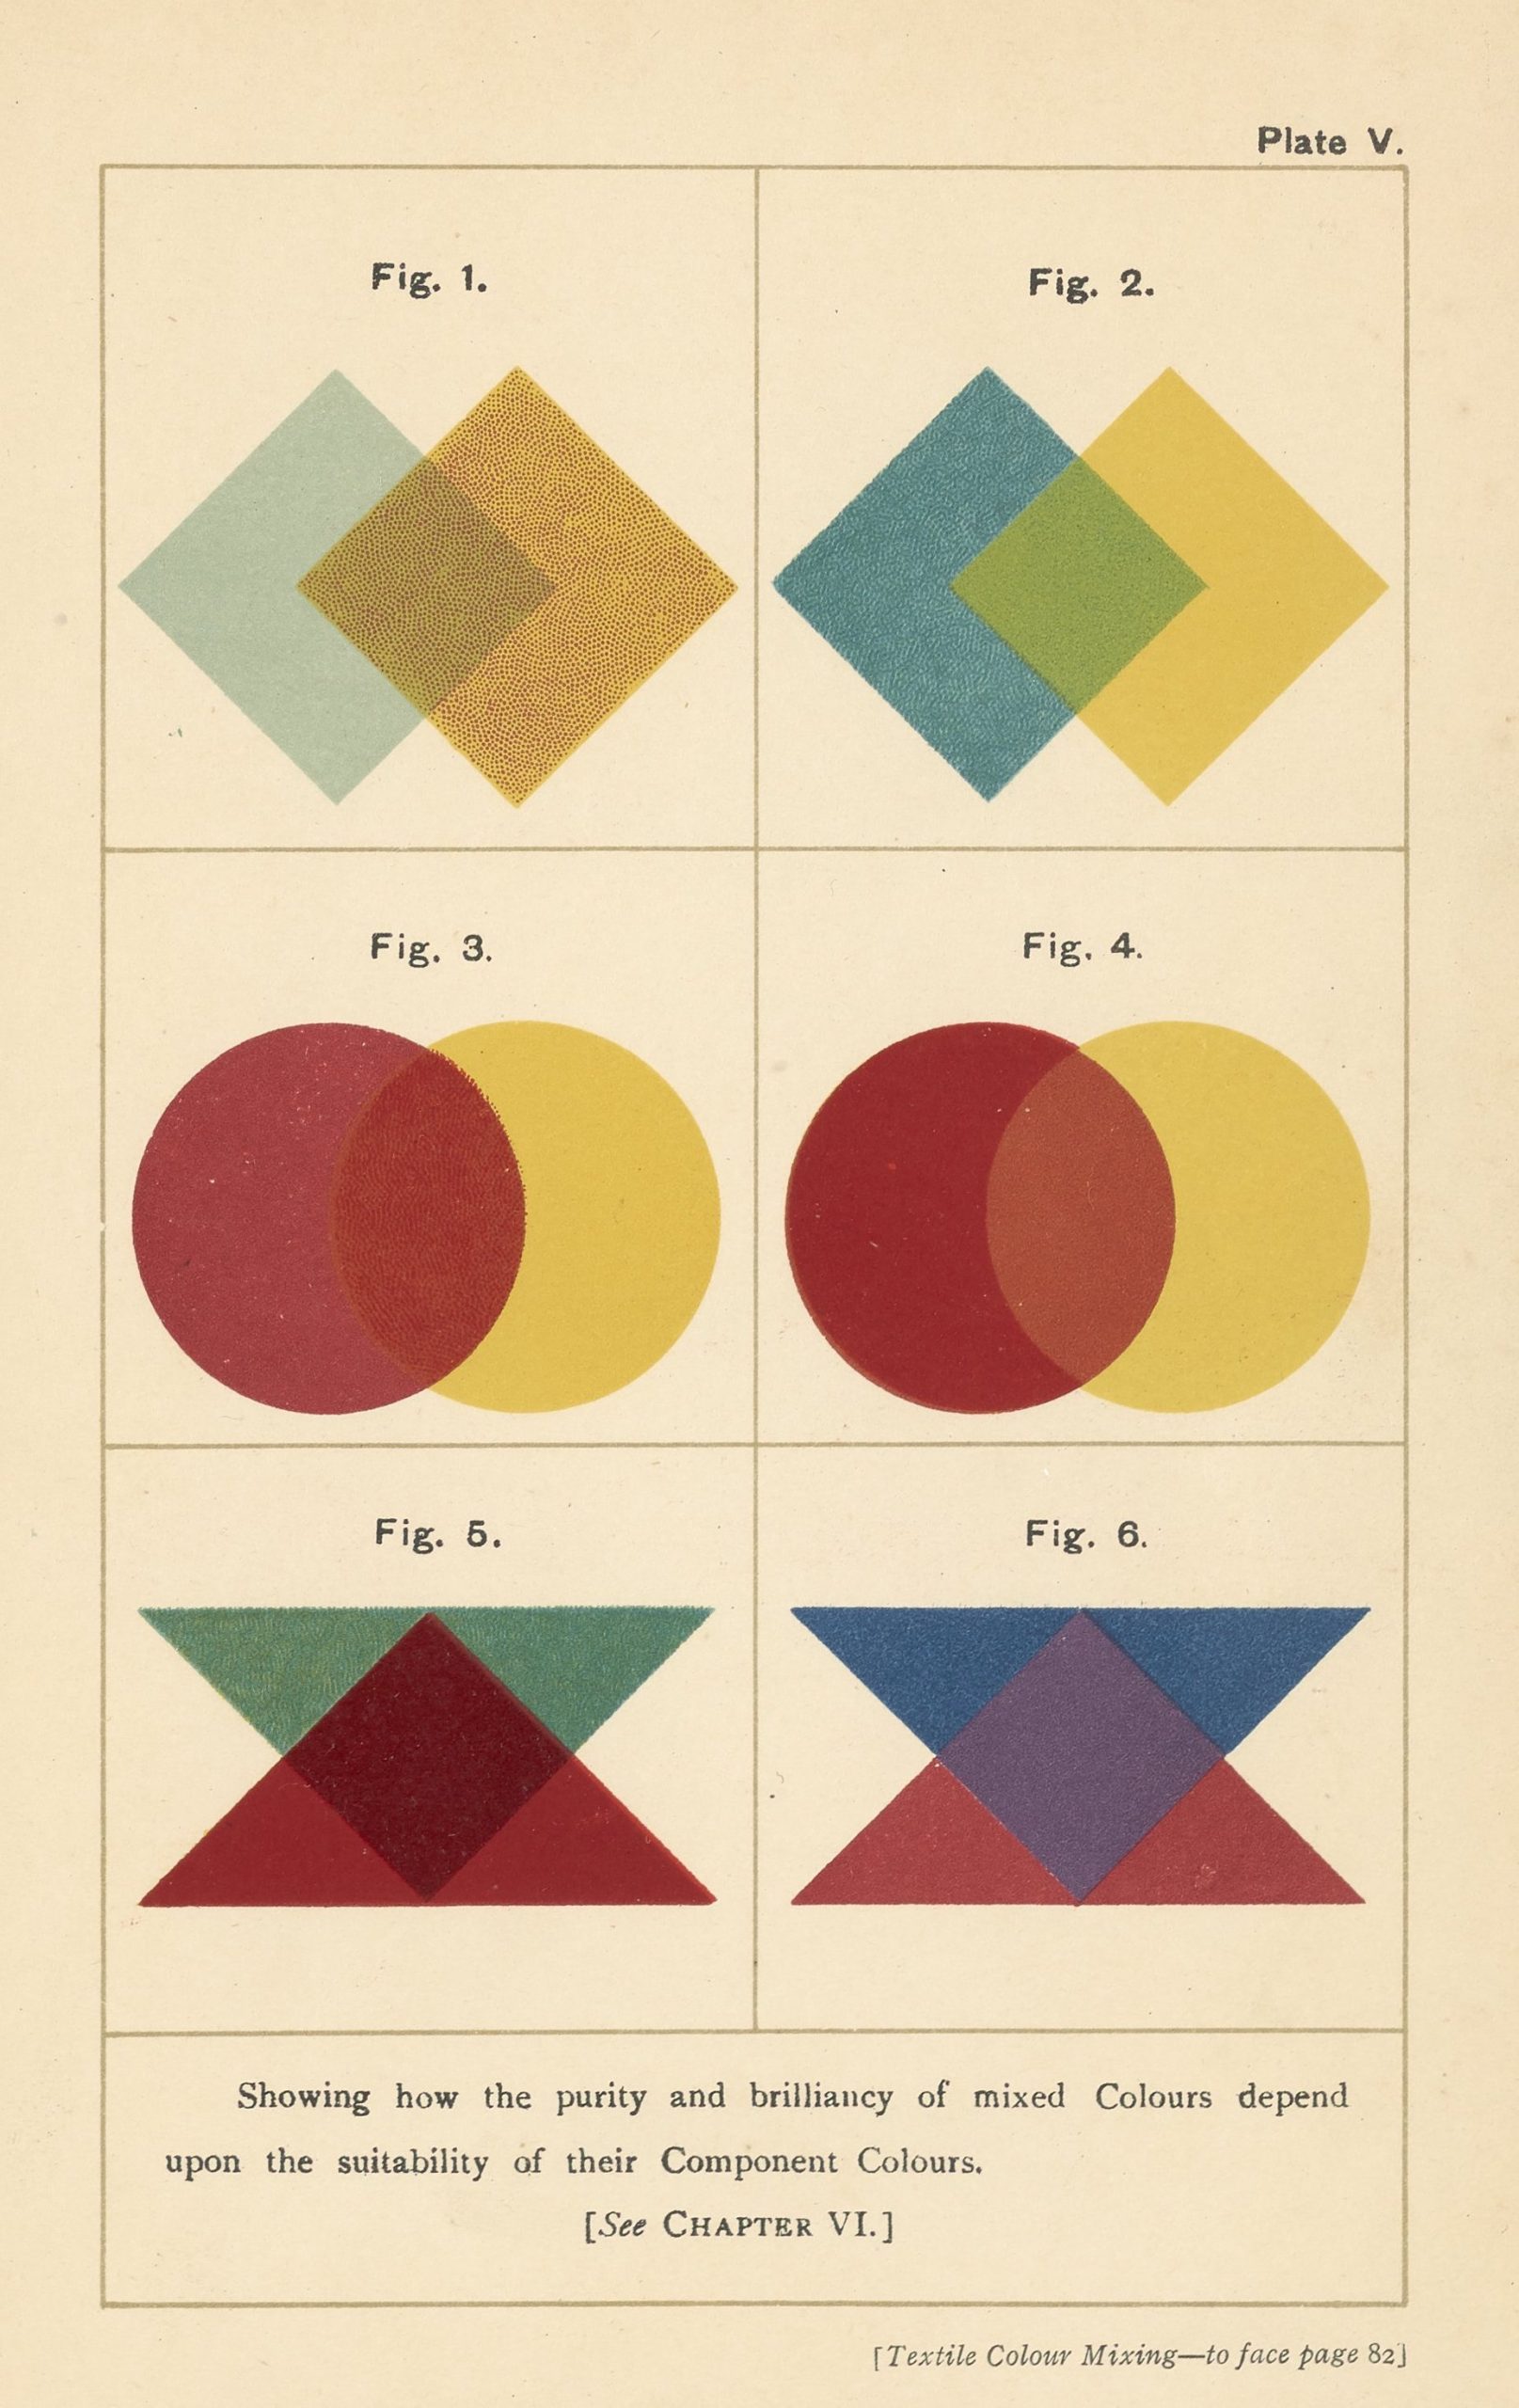 Textile Colour Mixing; A Manual Intended for the Use of Dyers, Calico Printers, and Colour Chemists1915